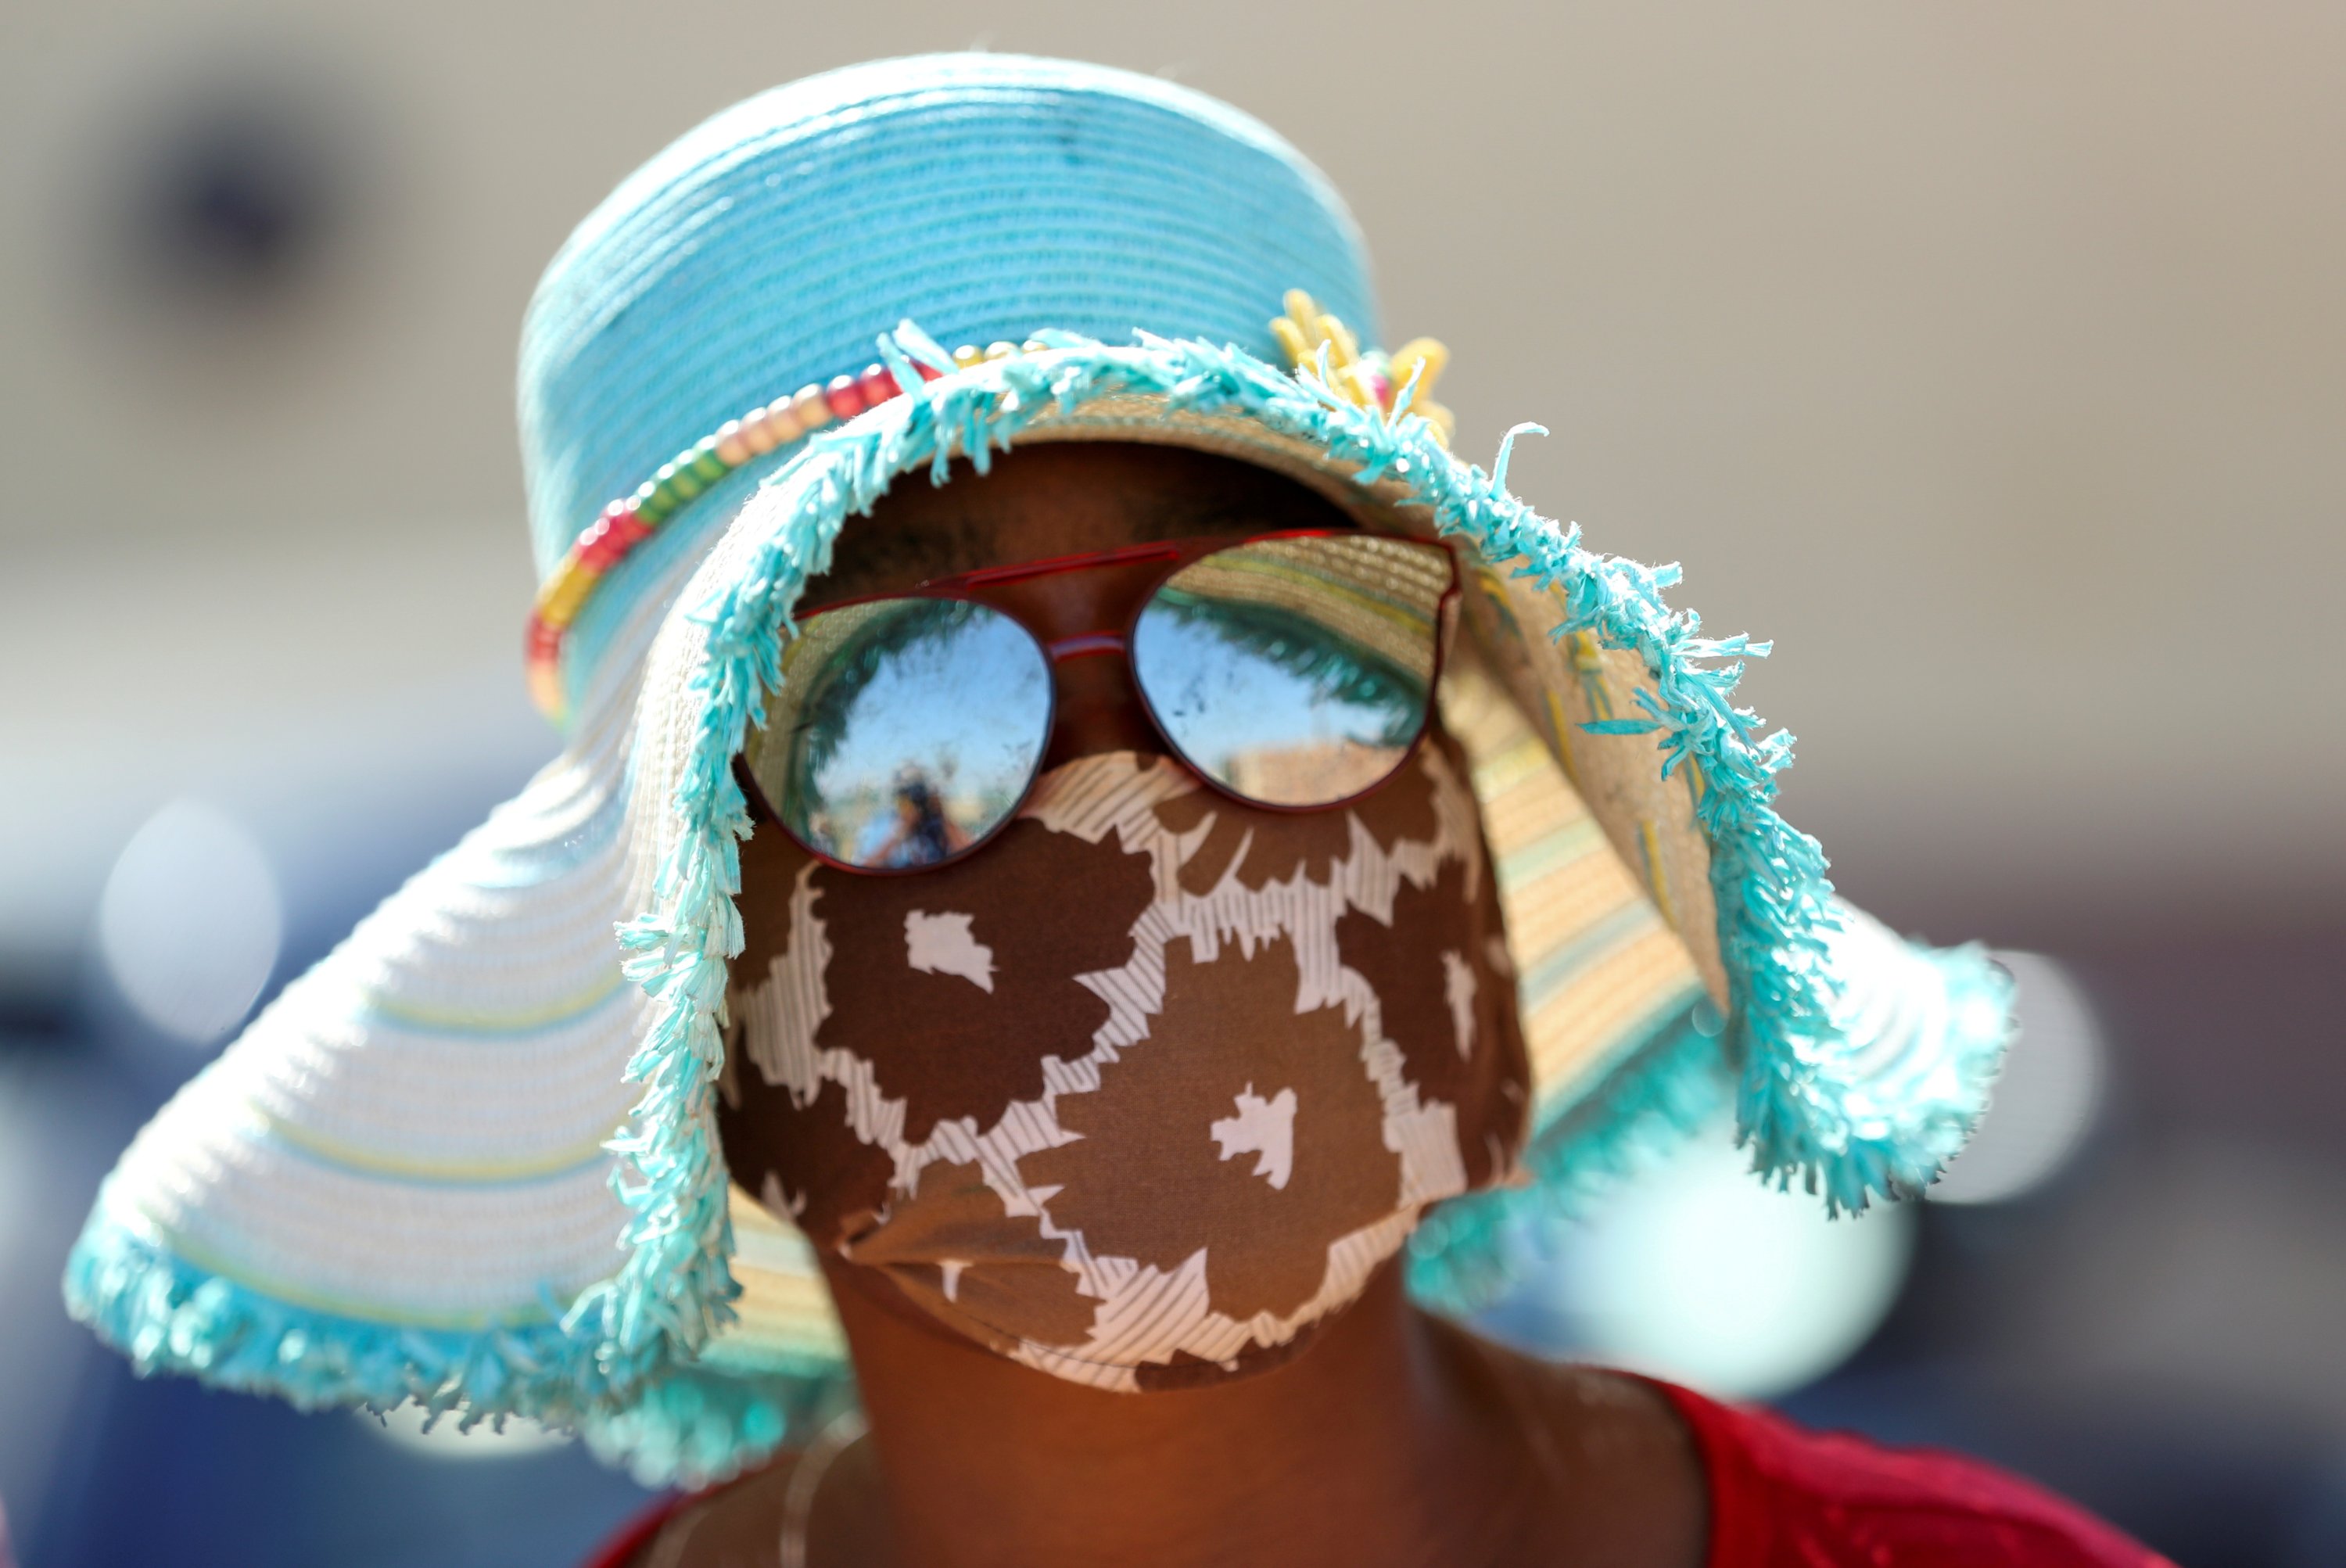 A woman wears a protective face mask during food distribution, as South Africa starts to relax some aspects of a stringent nationwide COVID-19 lockdown, in Diepsloot near Johannesburg, May 8, 2020. (Reuters Photo)